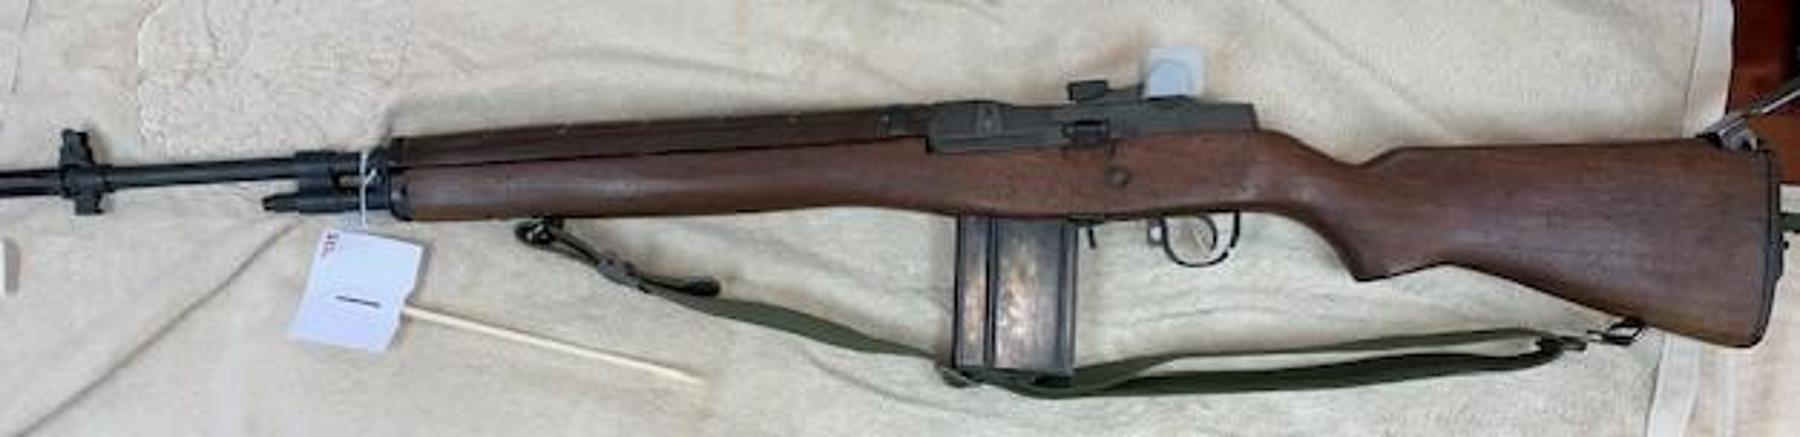 Firearm Auction Part 4 Including War Medals, Magazines and Camo Gear